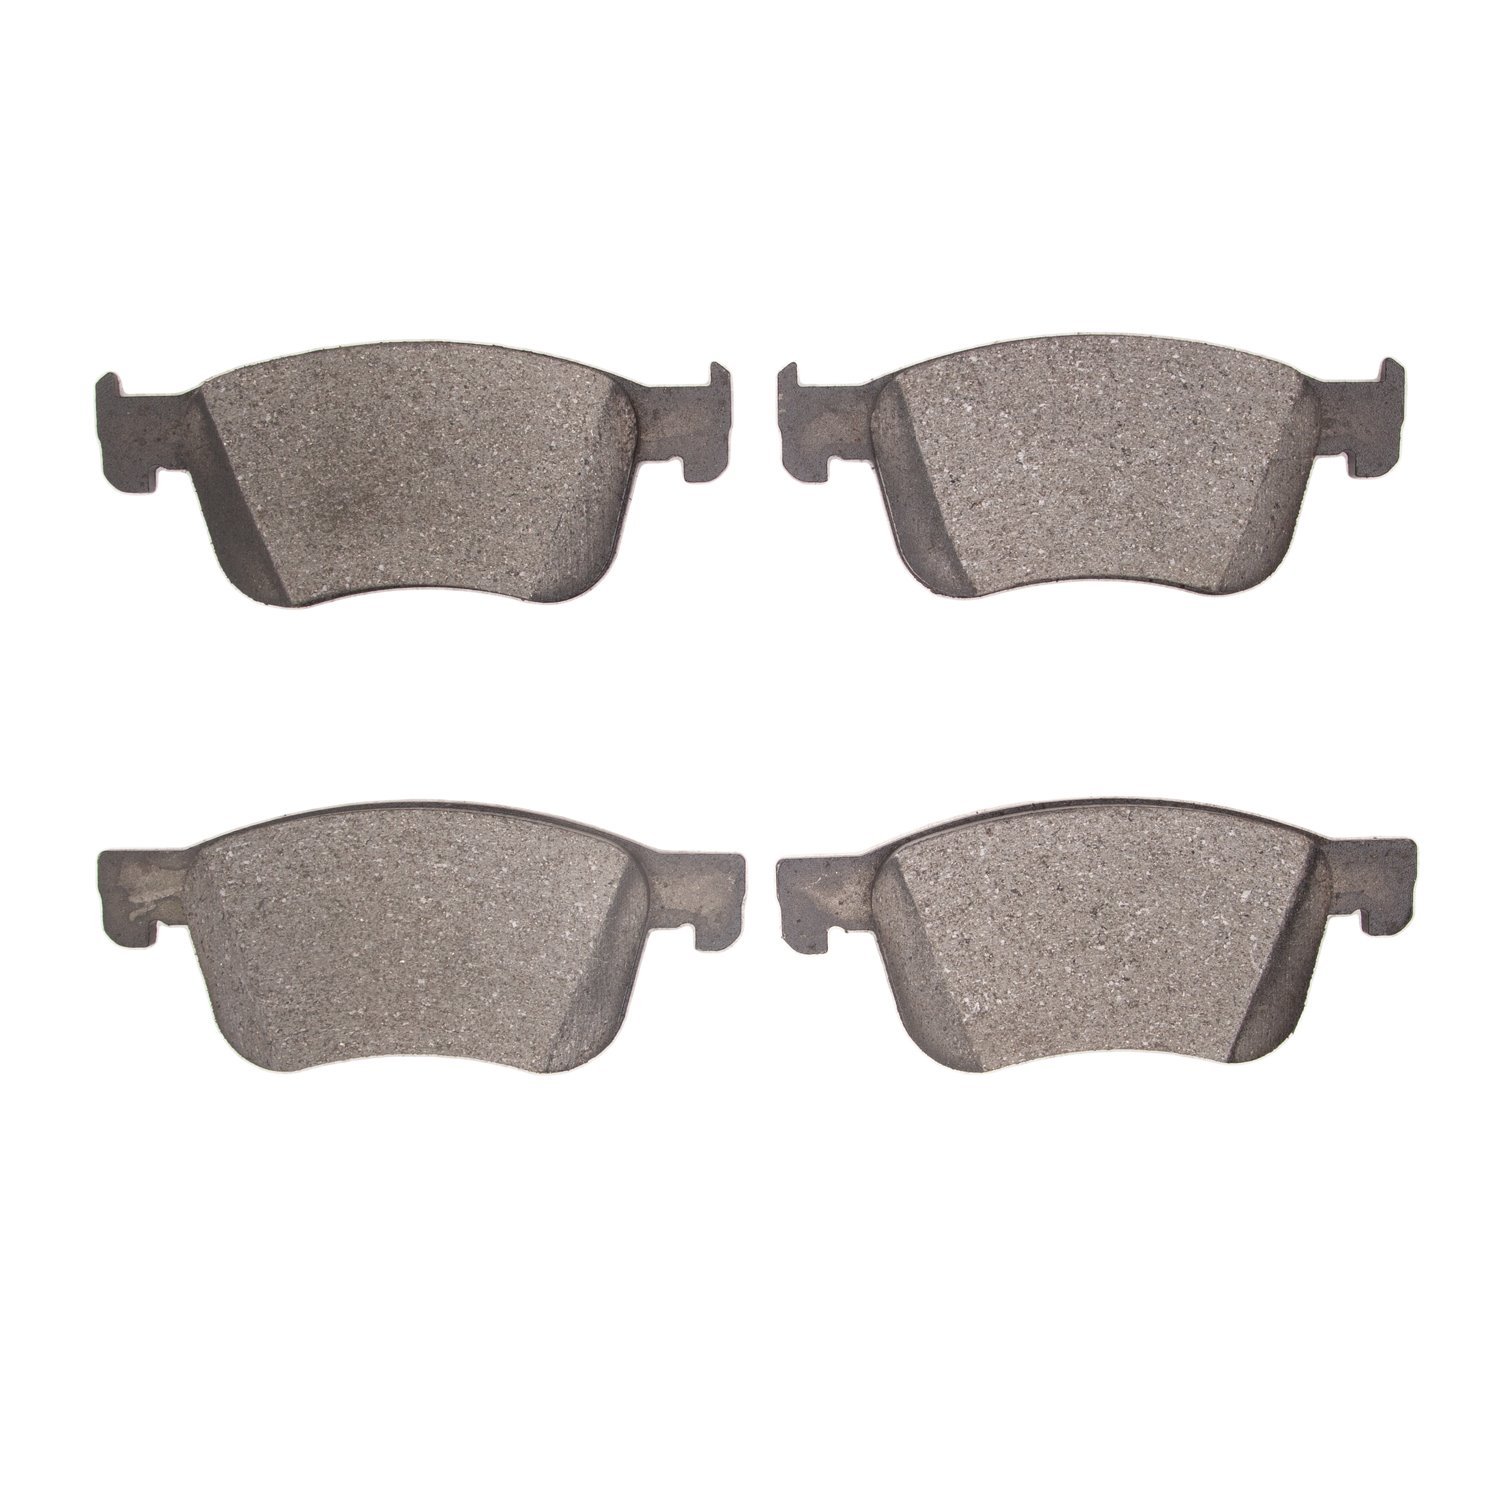 1551-2115-00 5000 Advanced Ceramic Brake Pads, Fits Select Acura/Honda, Position: Front